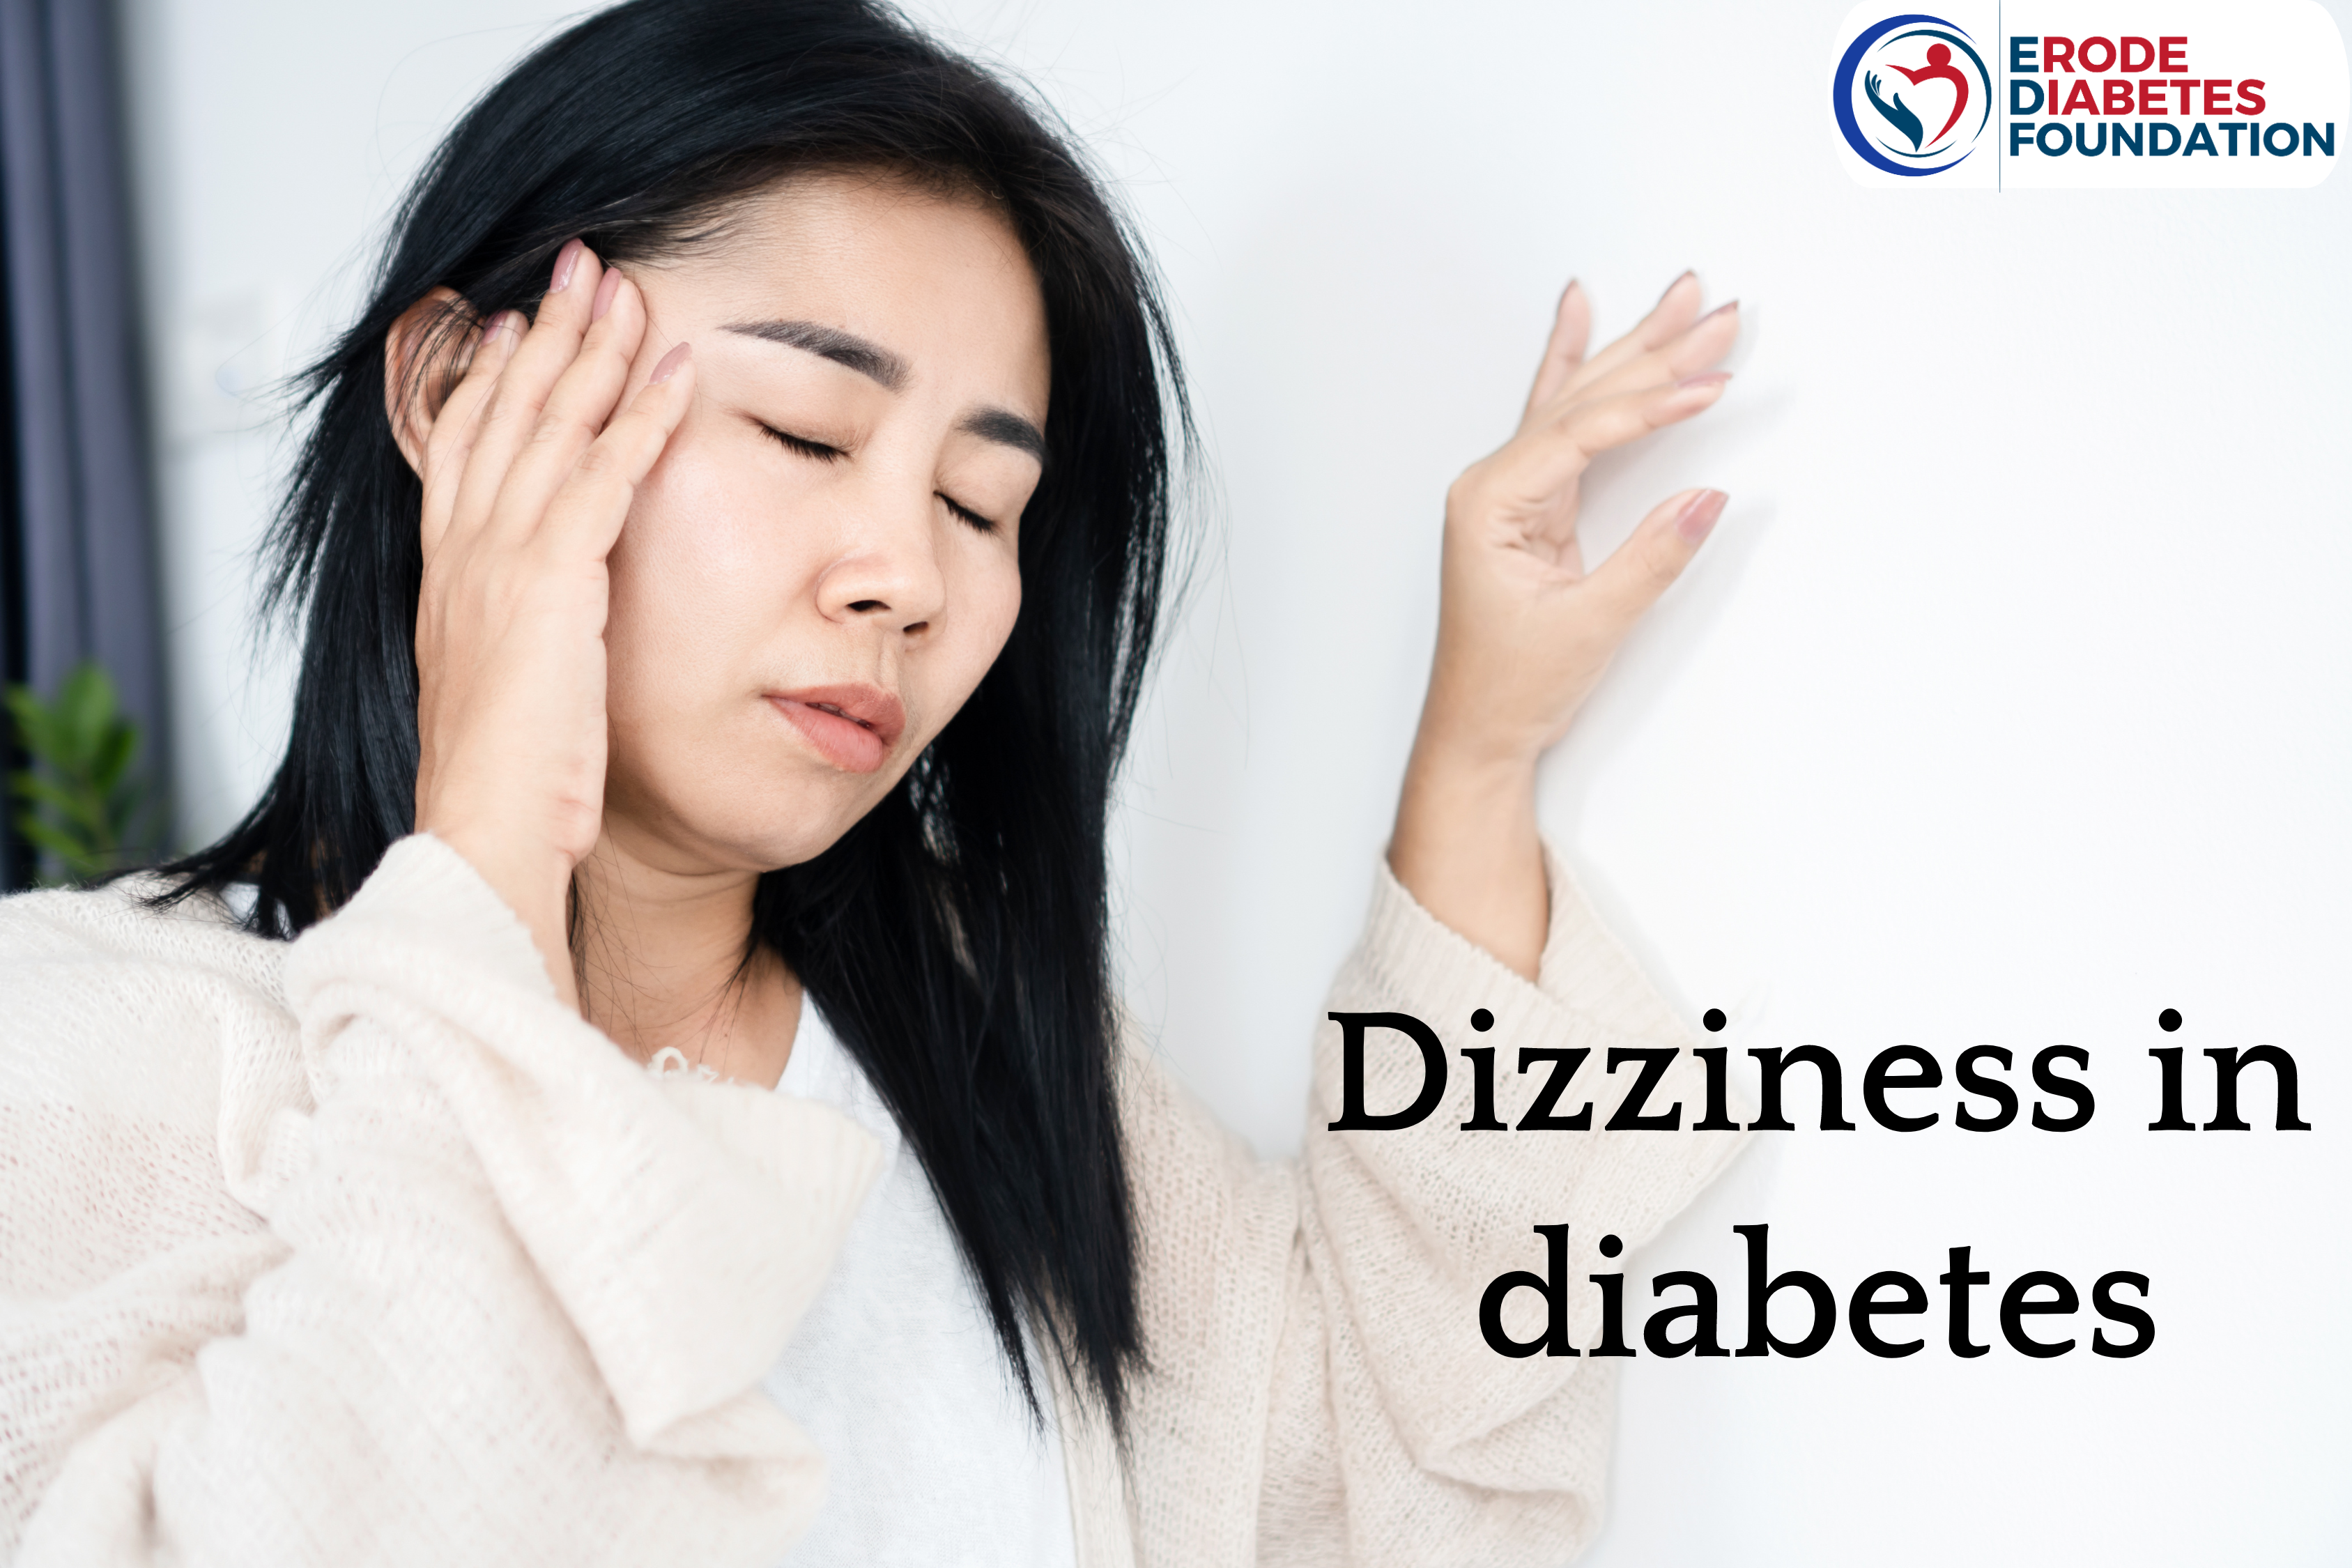 tips to prevent dizziness in diabetes